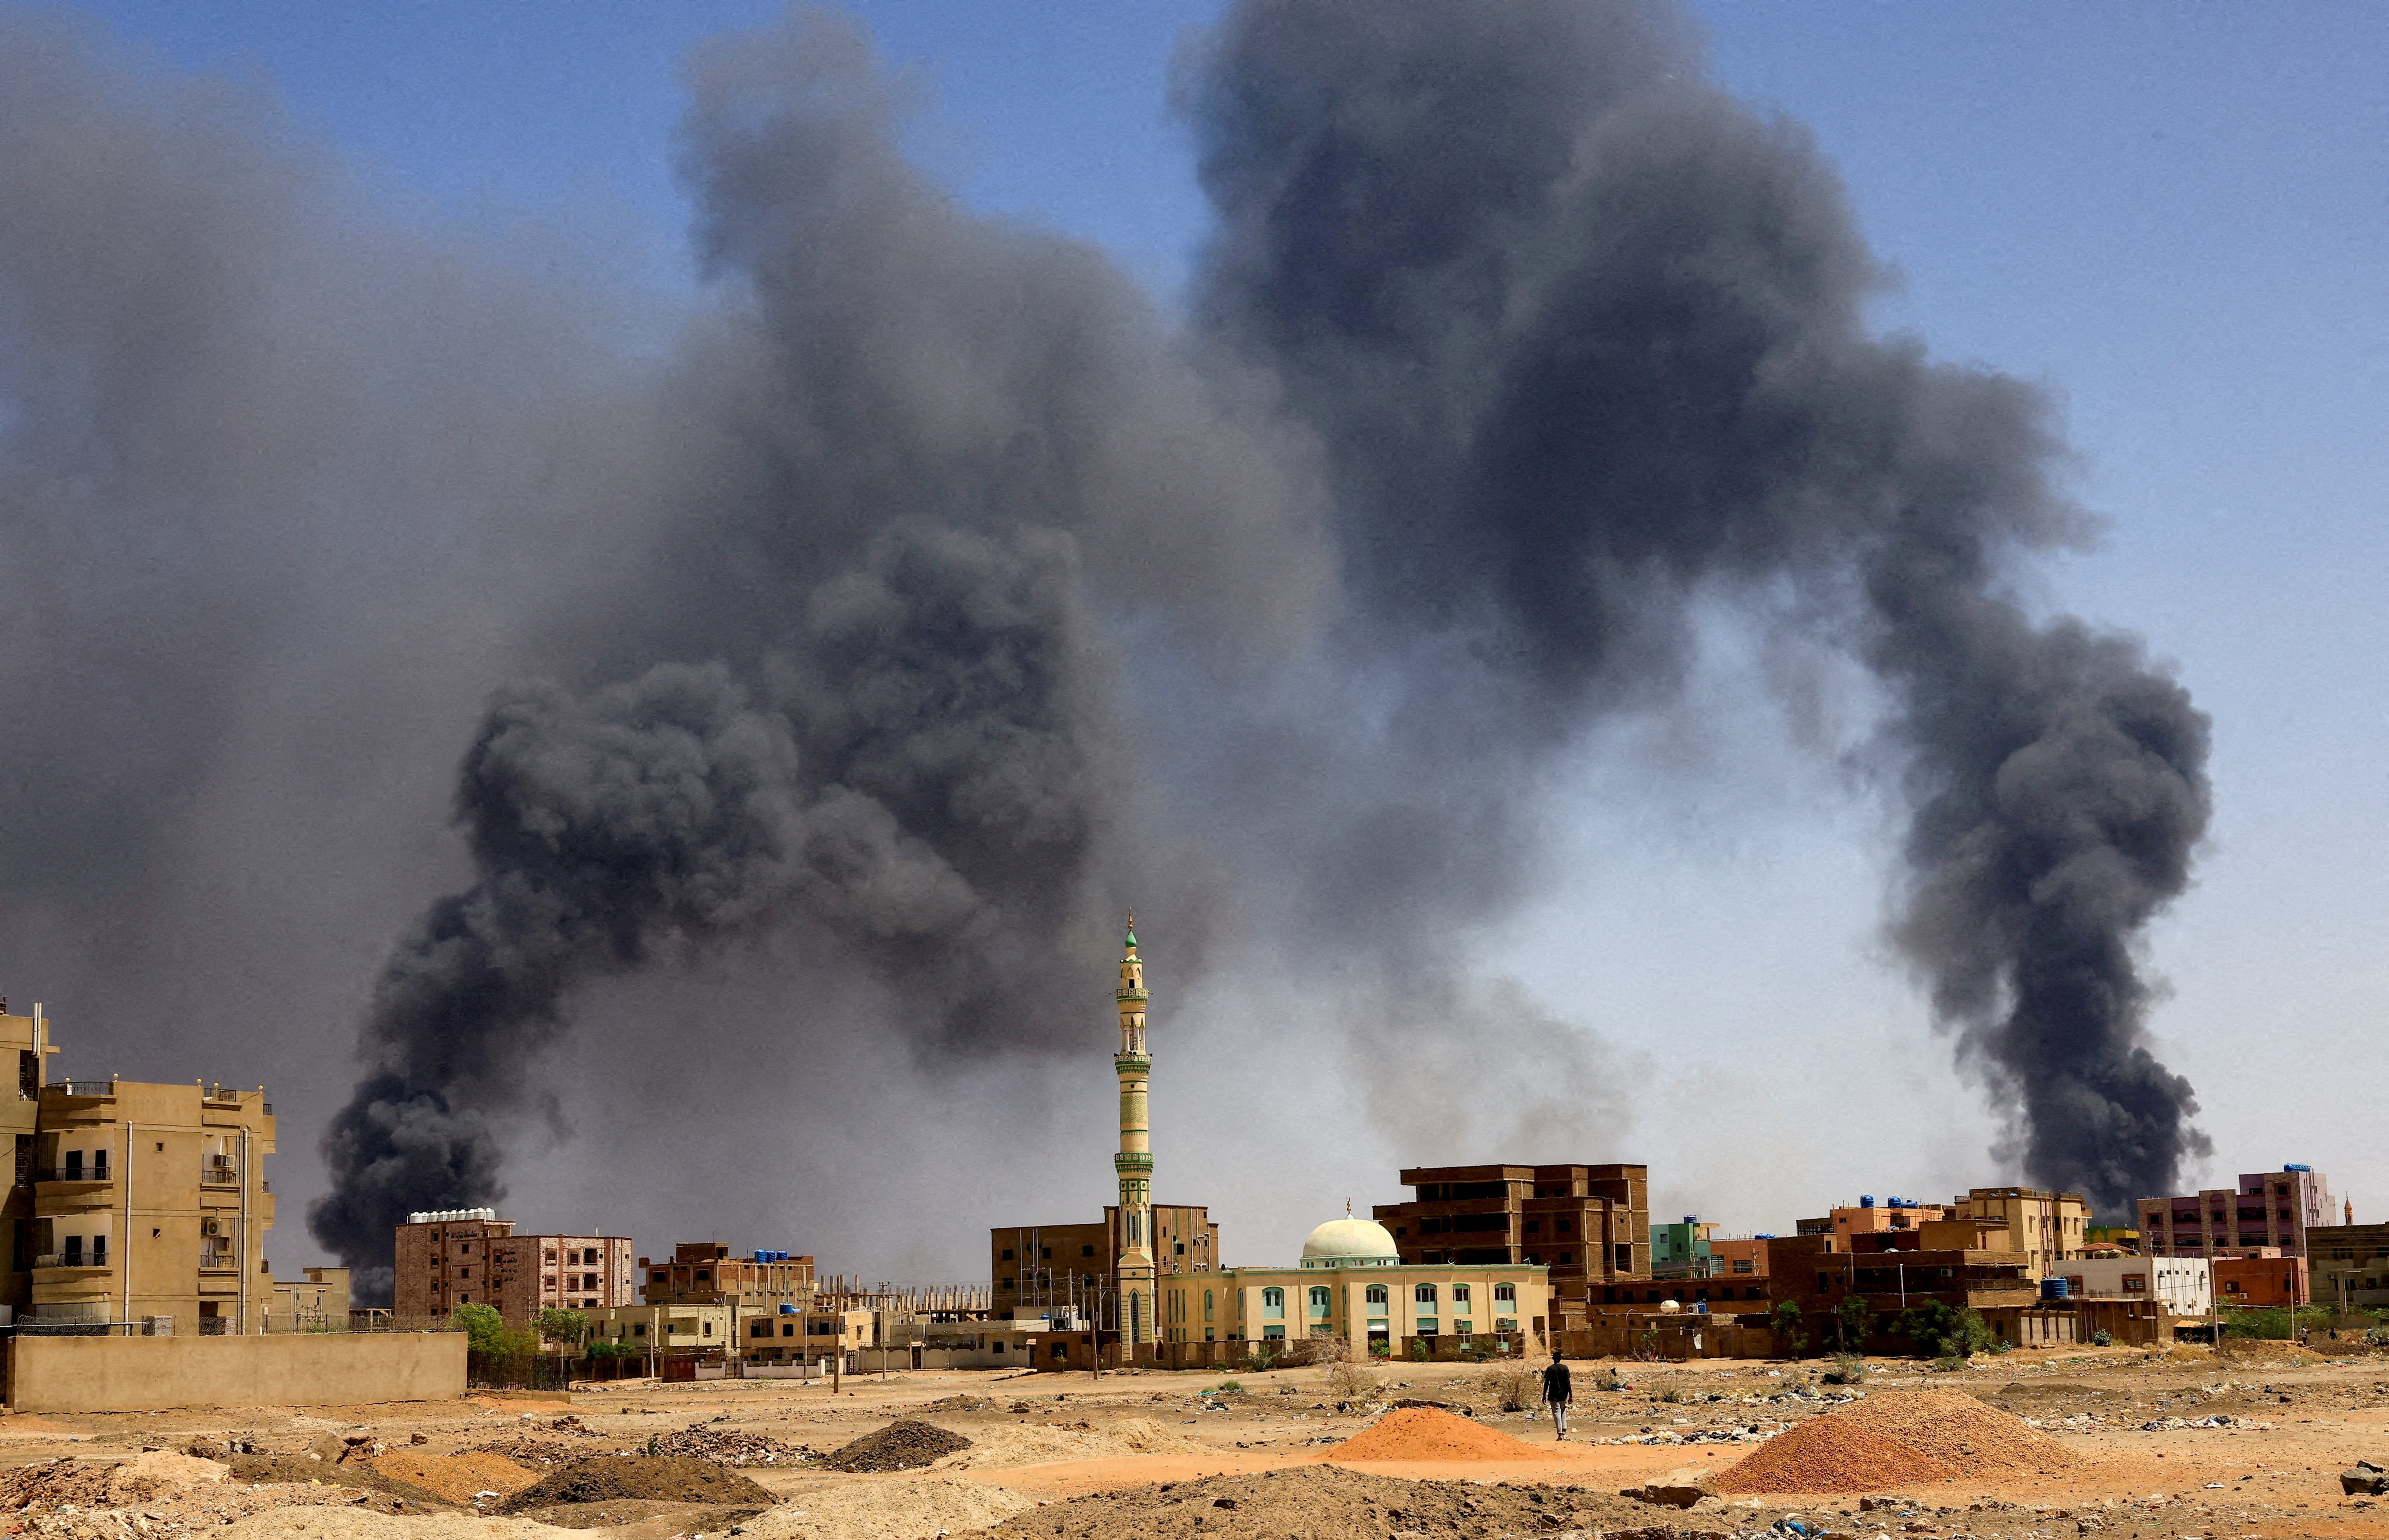 A man walks while smoke rises above buildings after aerial bombardment, during clashes between the paramilitary Rapid Support Forces and the army in Khartoum North